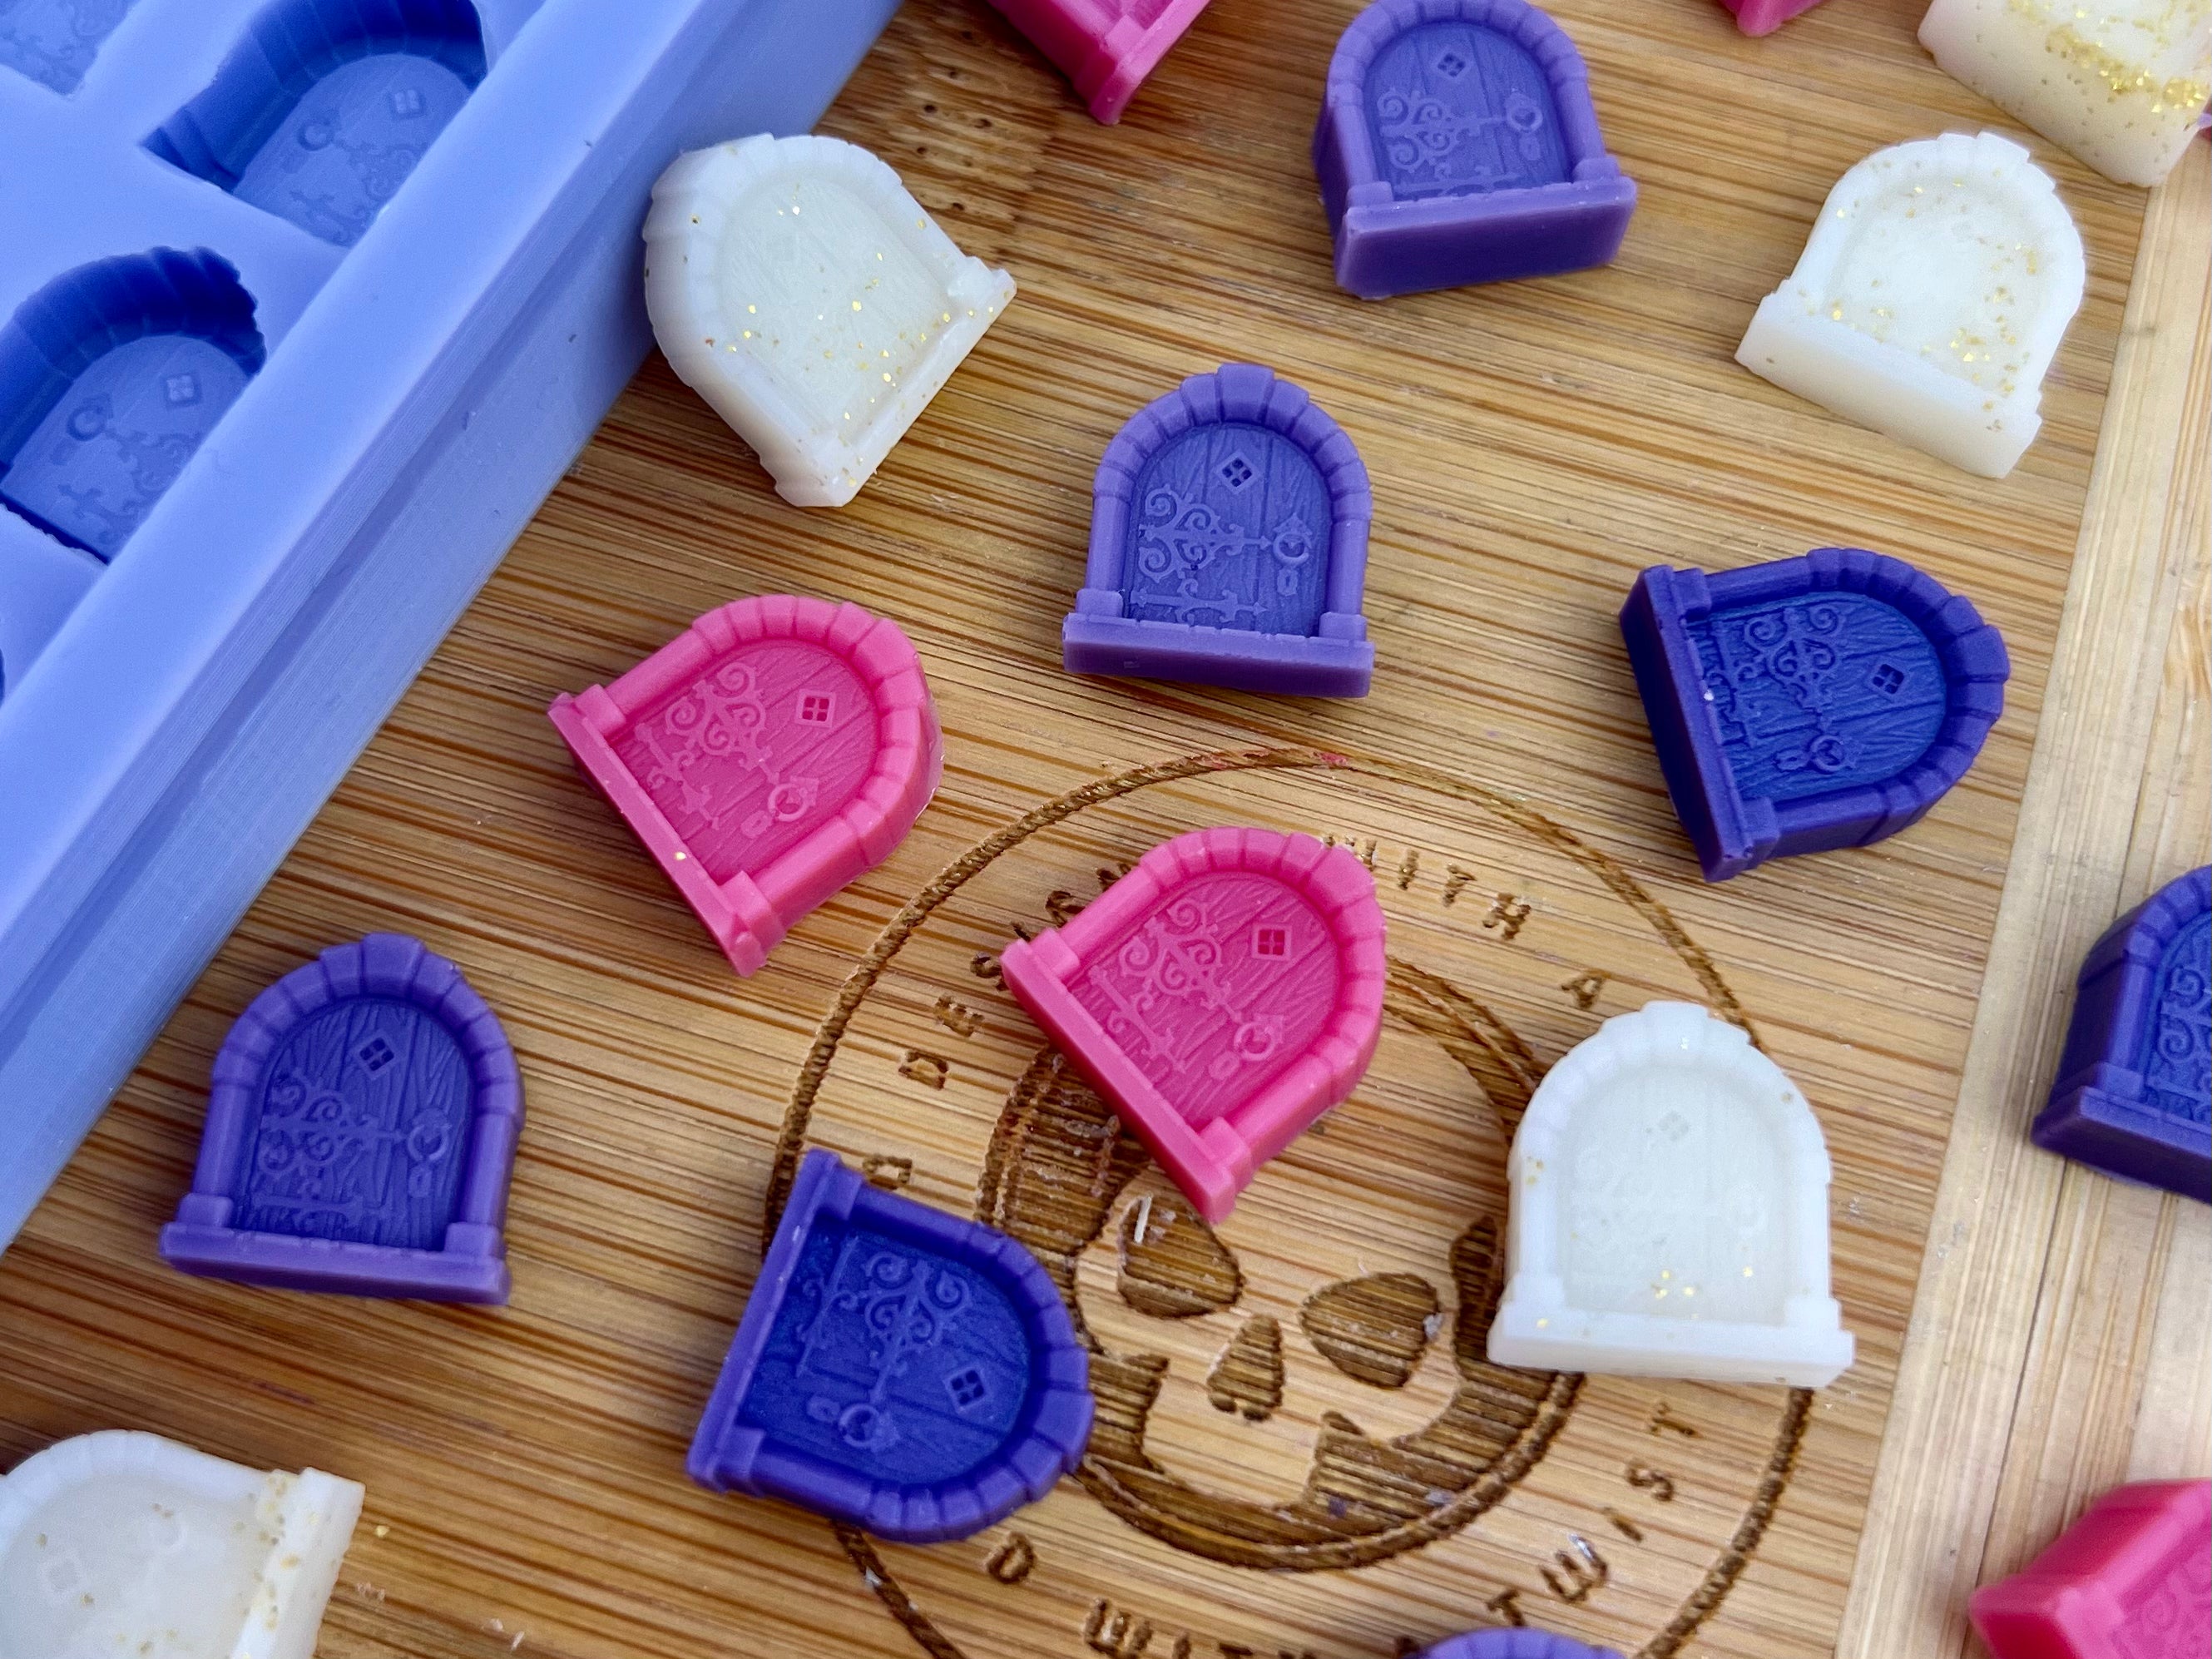 3D Fairy Door Scrape n Scoop Wax Silicone Mold - Designed with a Twist - Top quality silicone molds made in the UK.